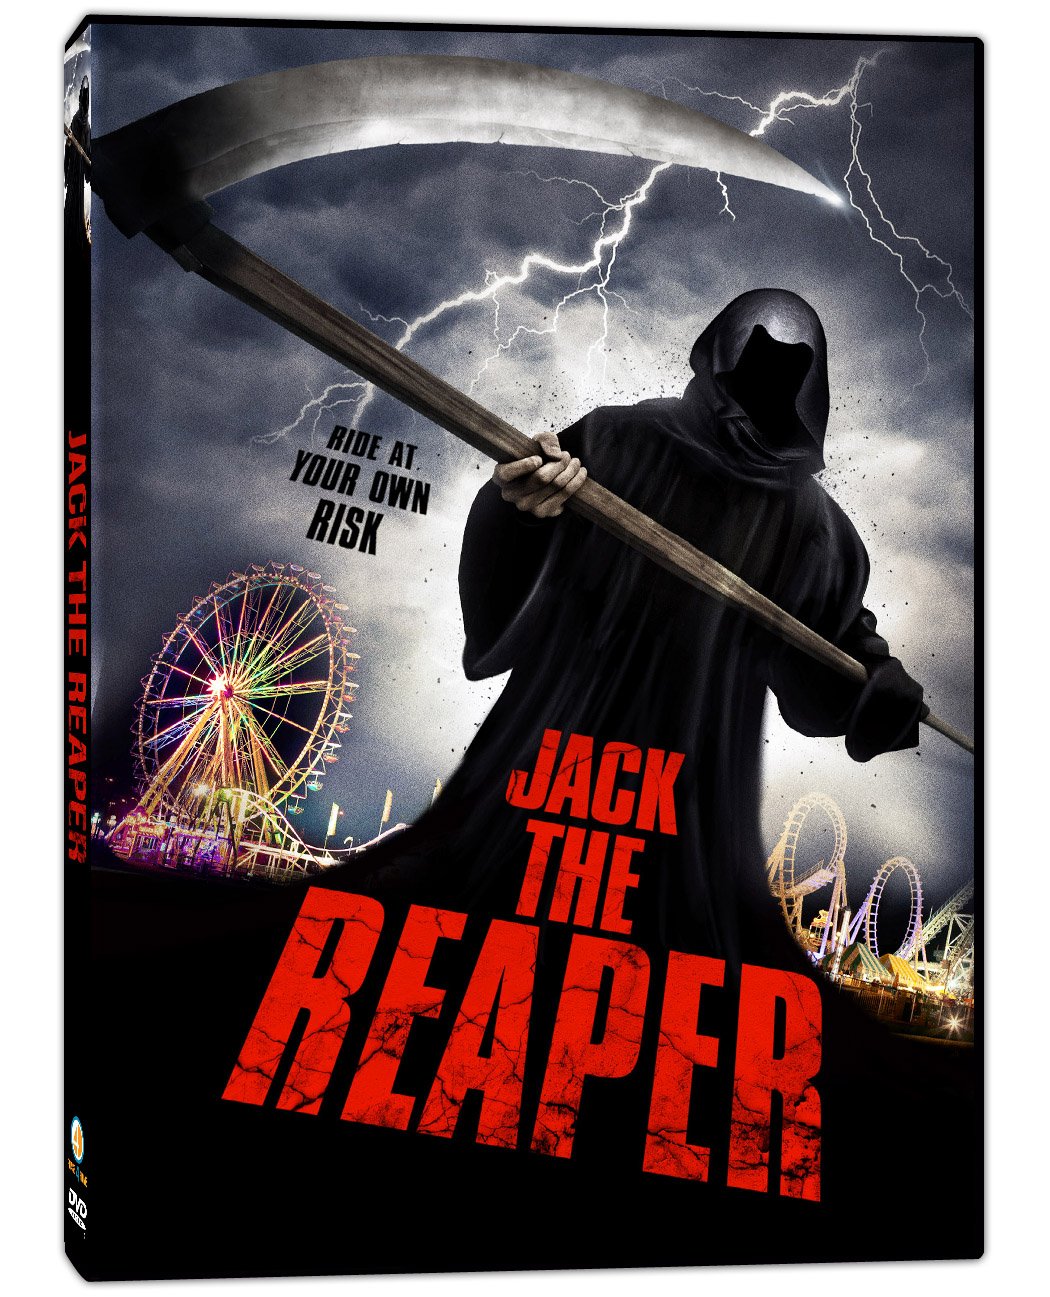 Jack The Reaper